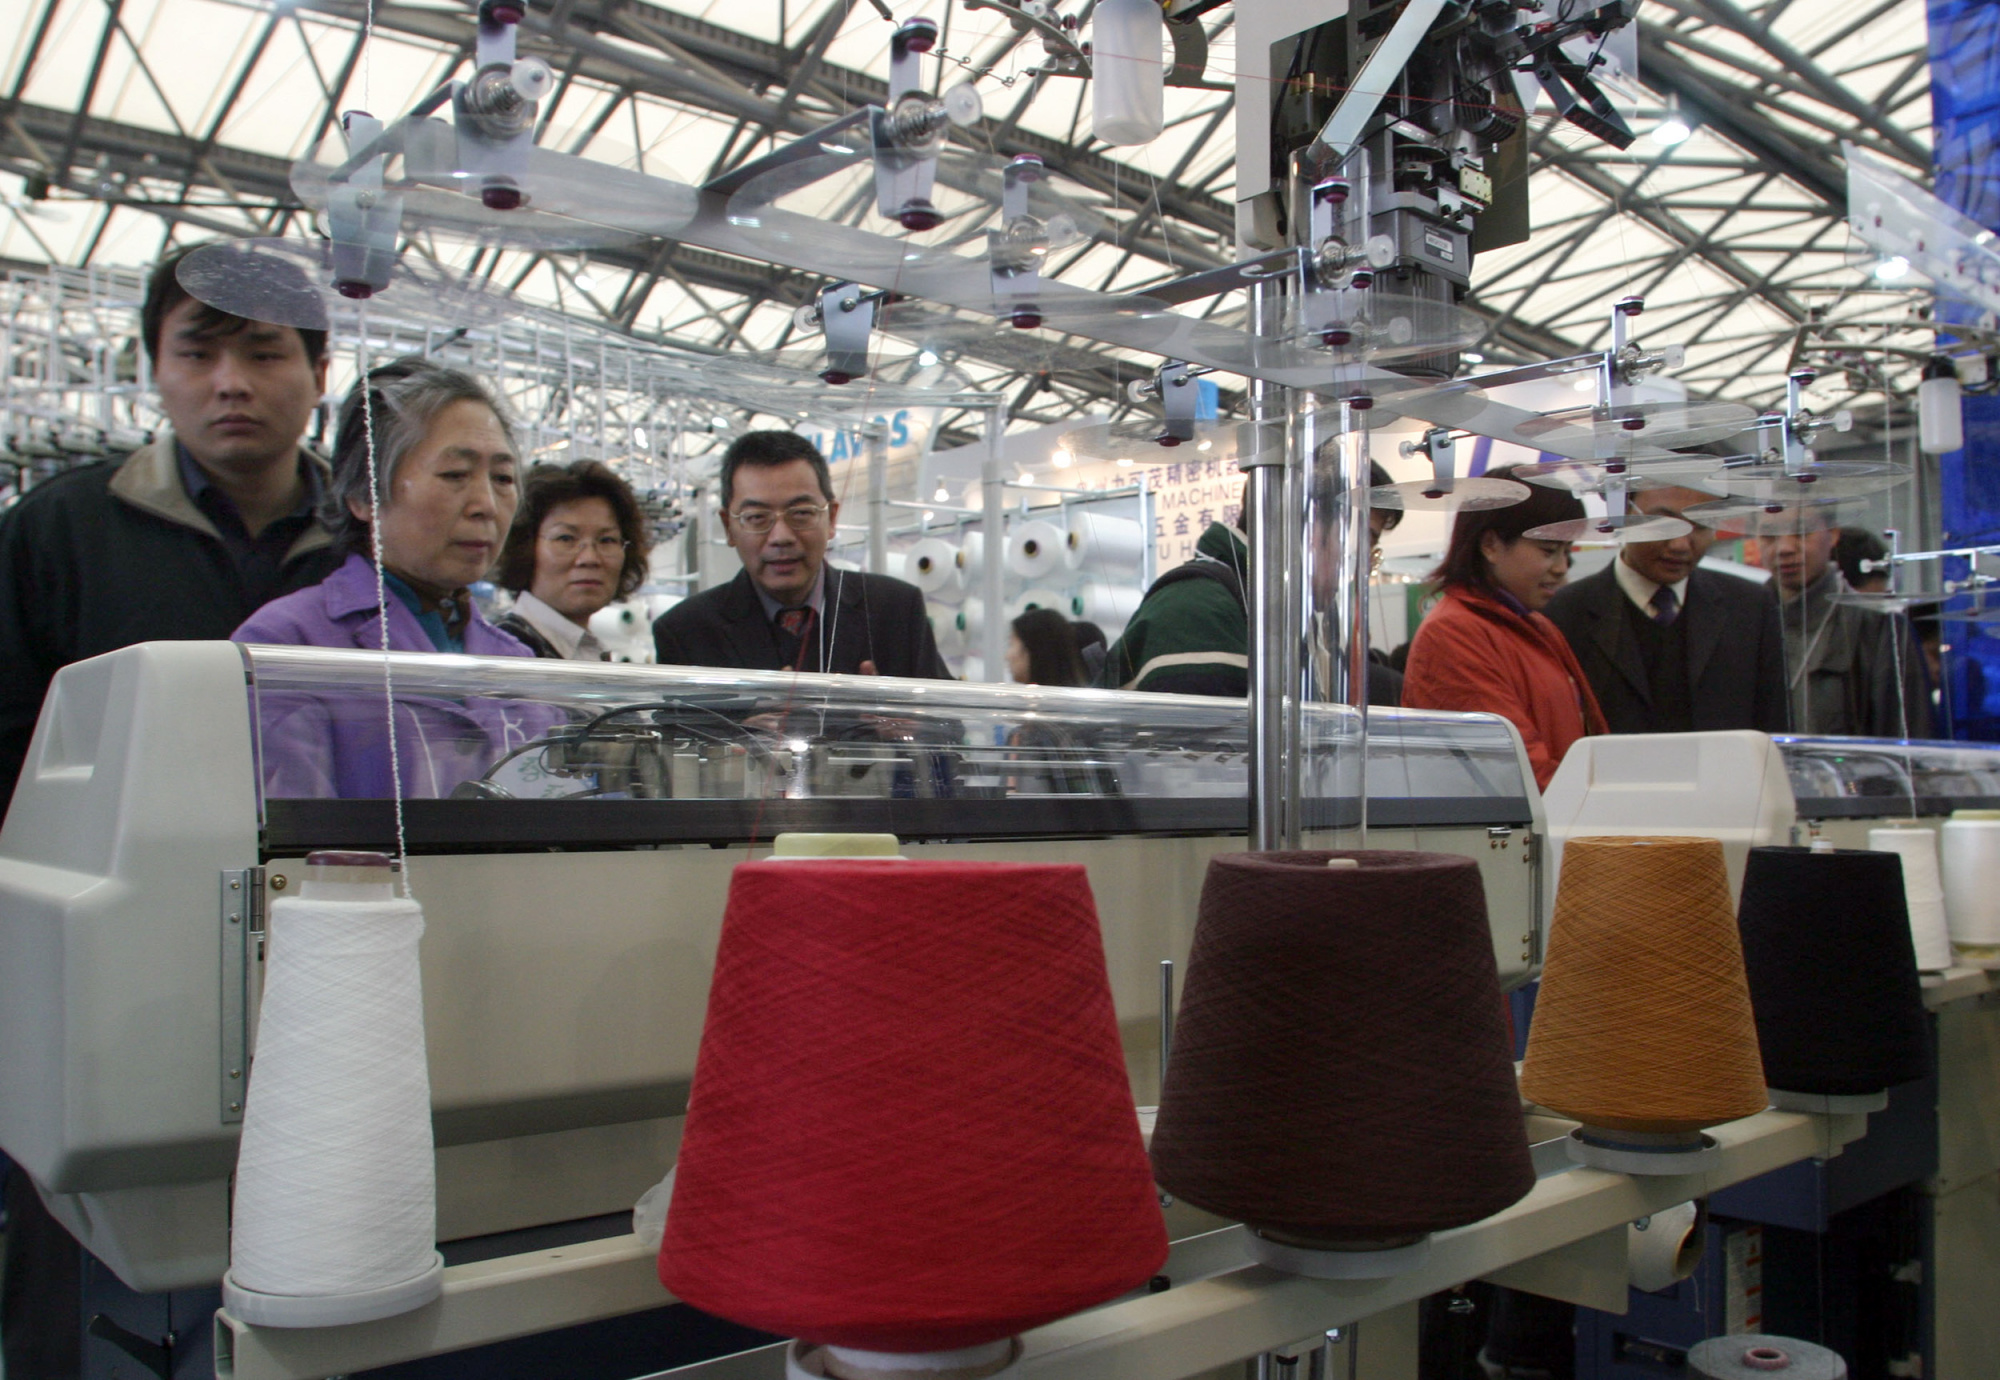 These Hi Tech Knitting Machines Will Soon Be Making Car